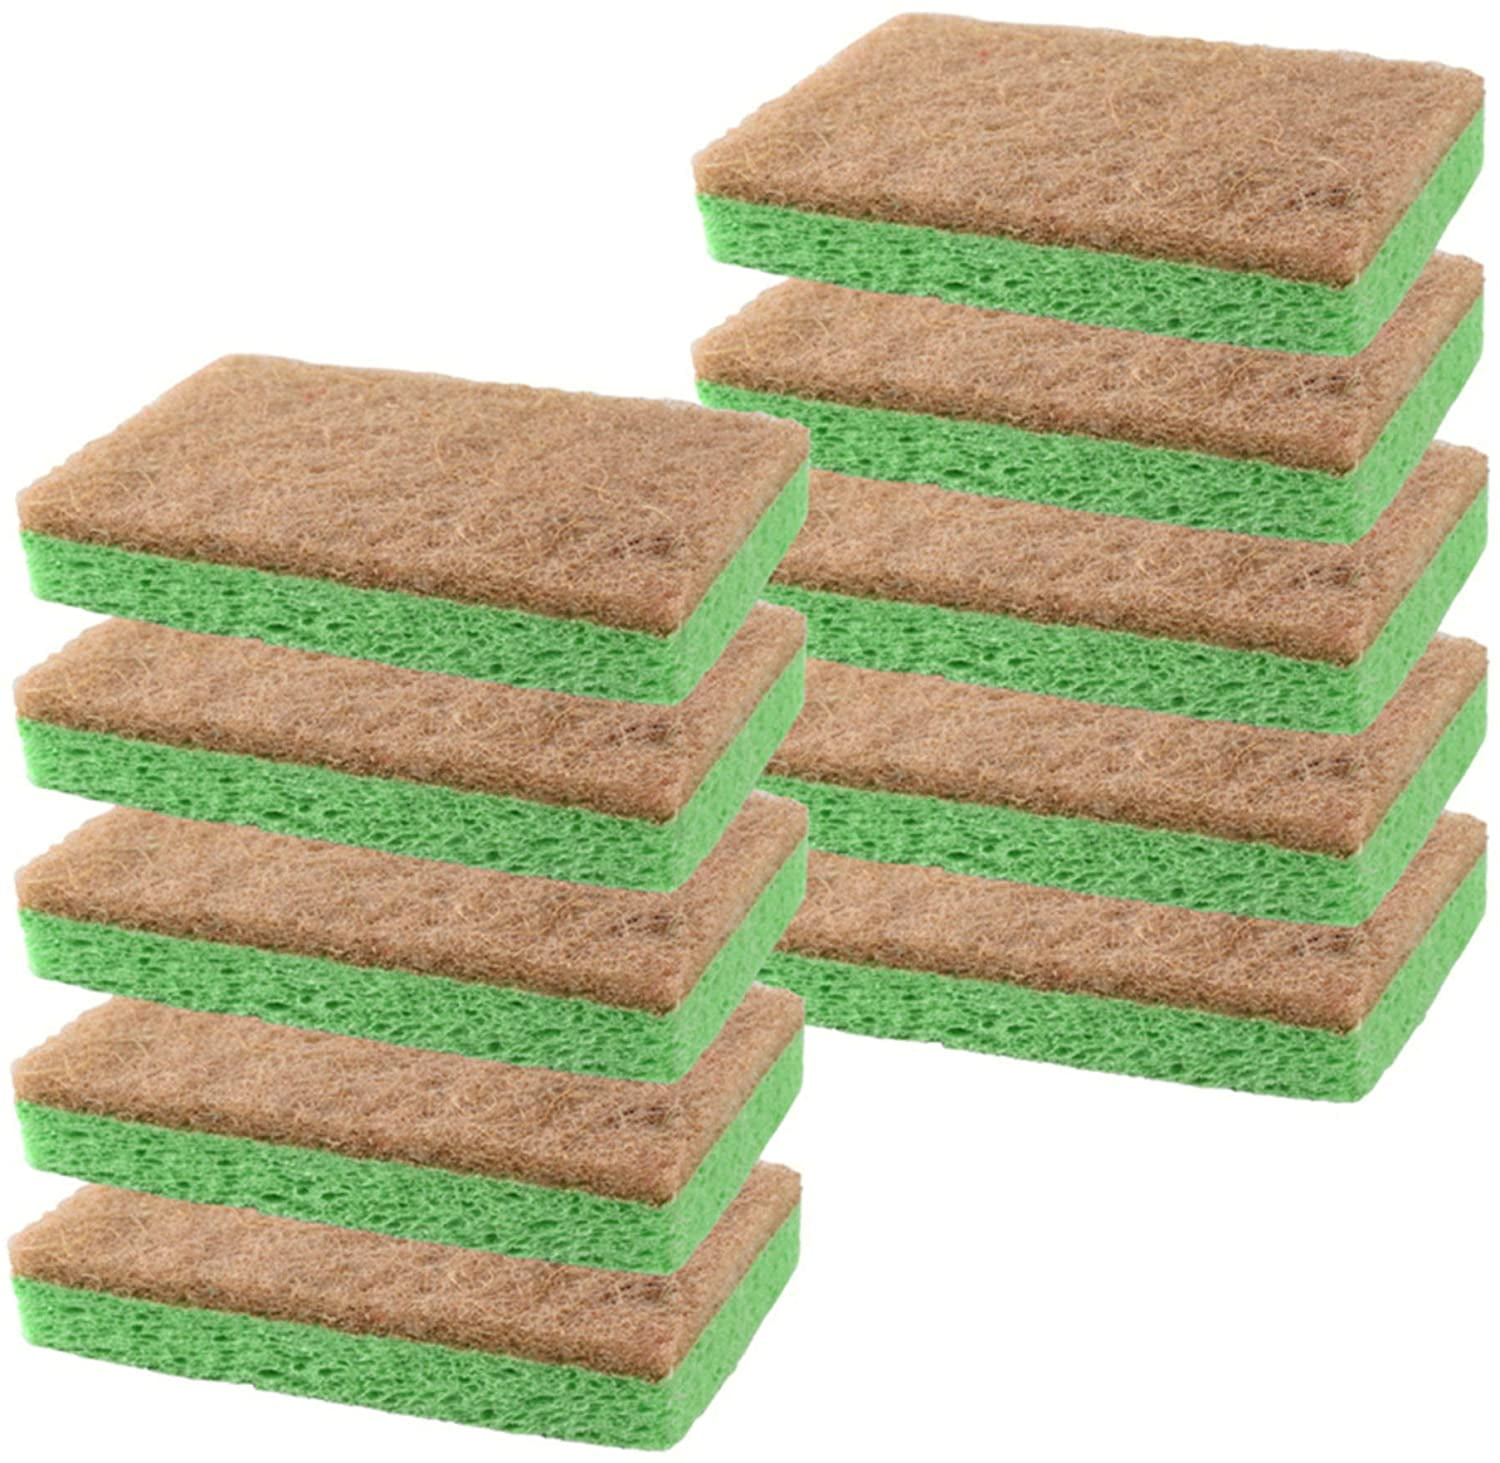 Natural Plant-Based Scrub Sponge by scrub-it Biodegradable scrubbing sponges for Kitchen and BathroomÃ¢â‚¬â€œ Single Wrapped Pack of 10 Non-Scratch 